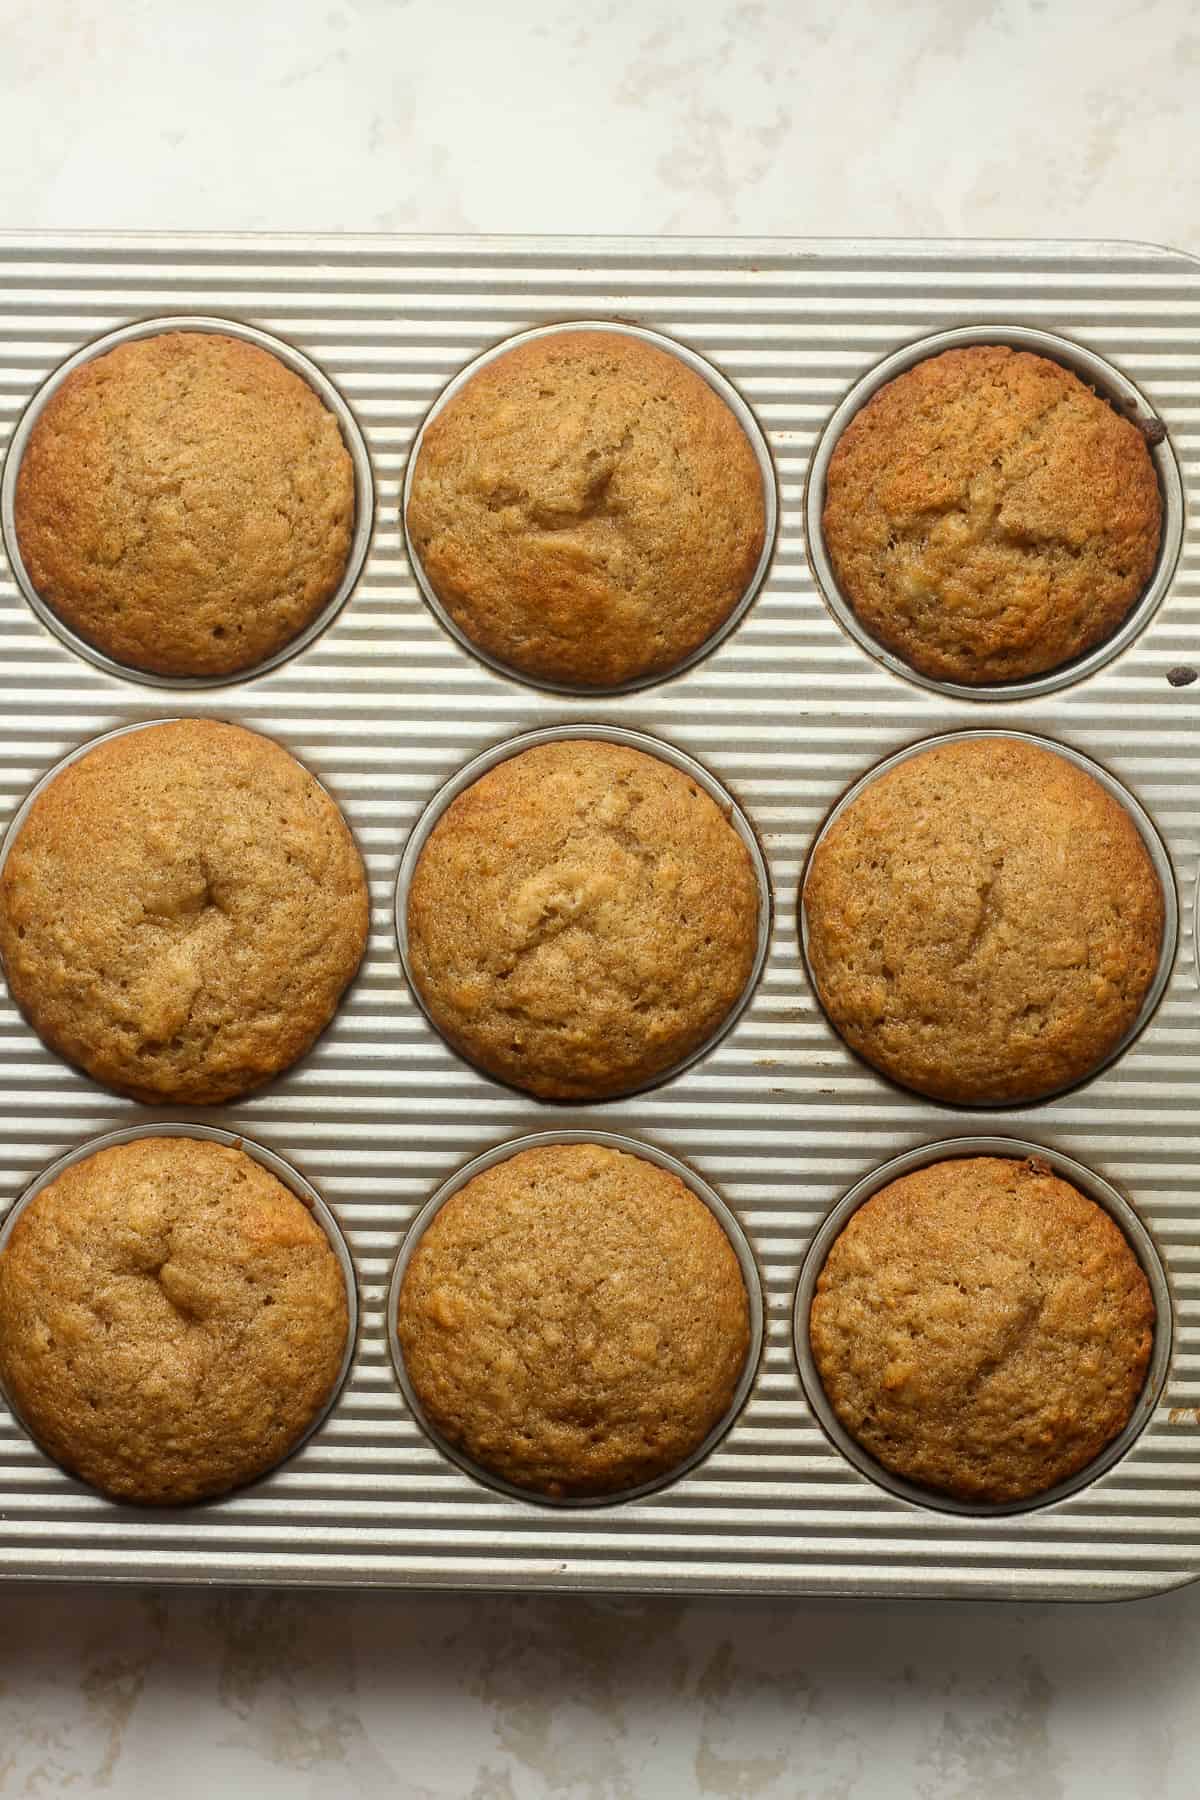 A muffin pan with baked banana muffins.